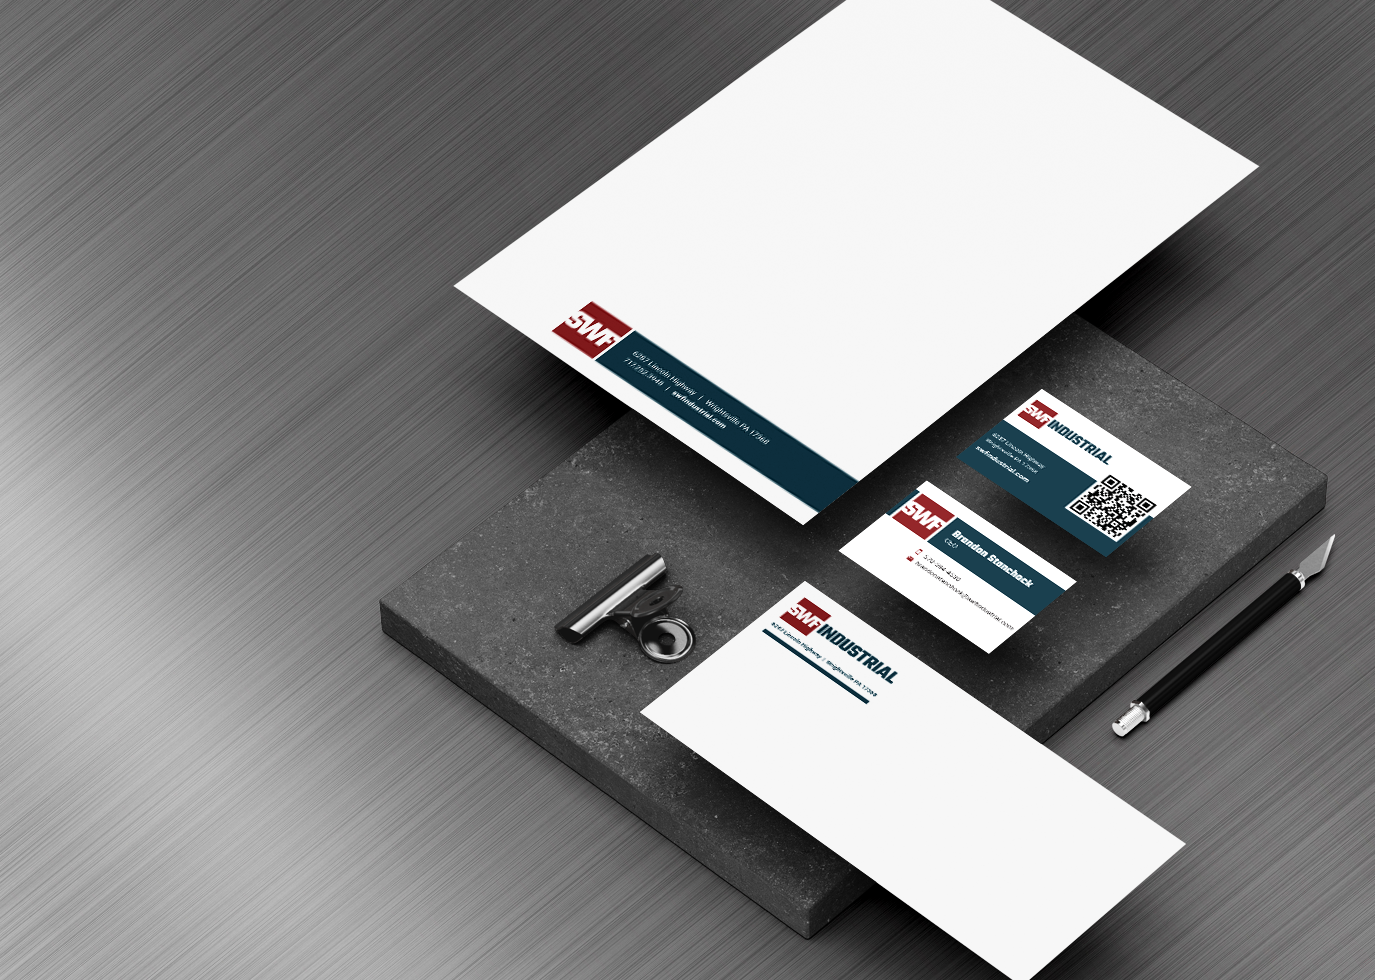 stationary and papergoods like business cards showing logo design and Synapse capacity